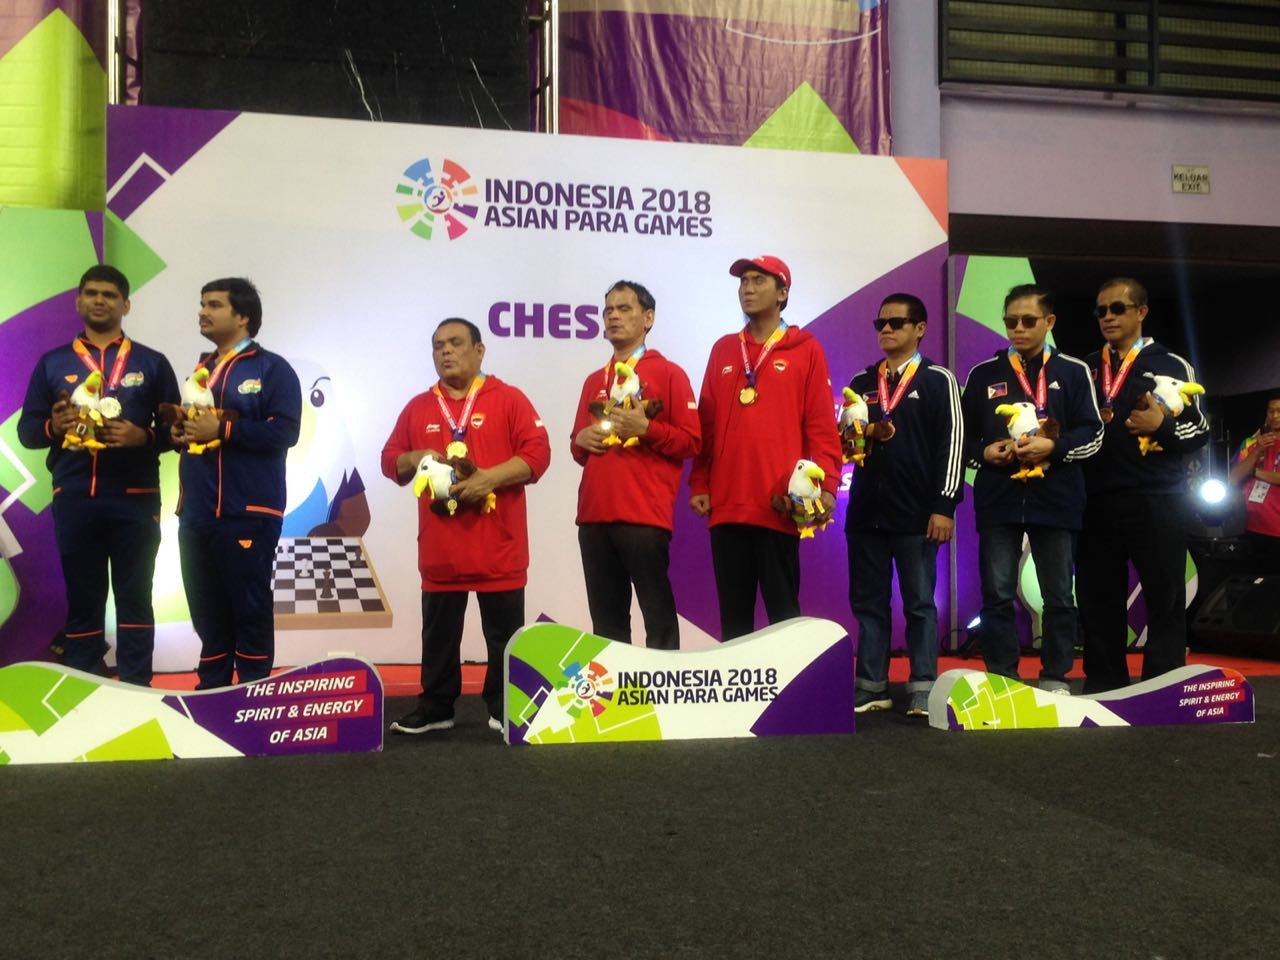 Hosts Indonesia won 11 gold medals in the chess ©Asian Para Games